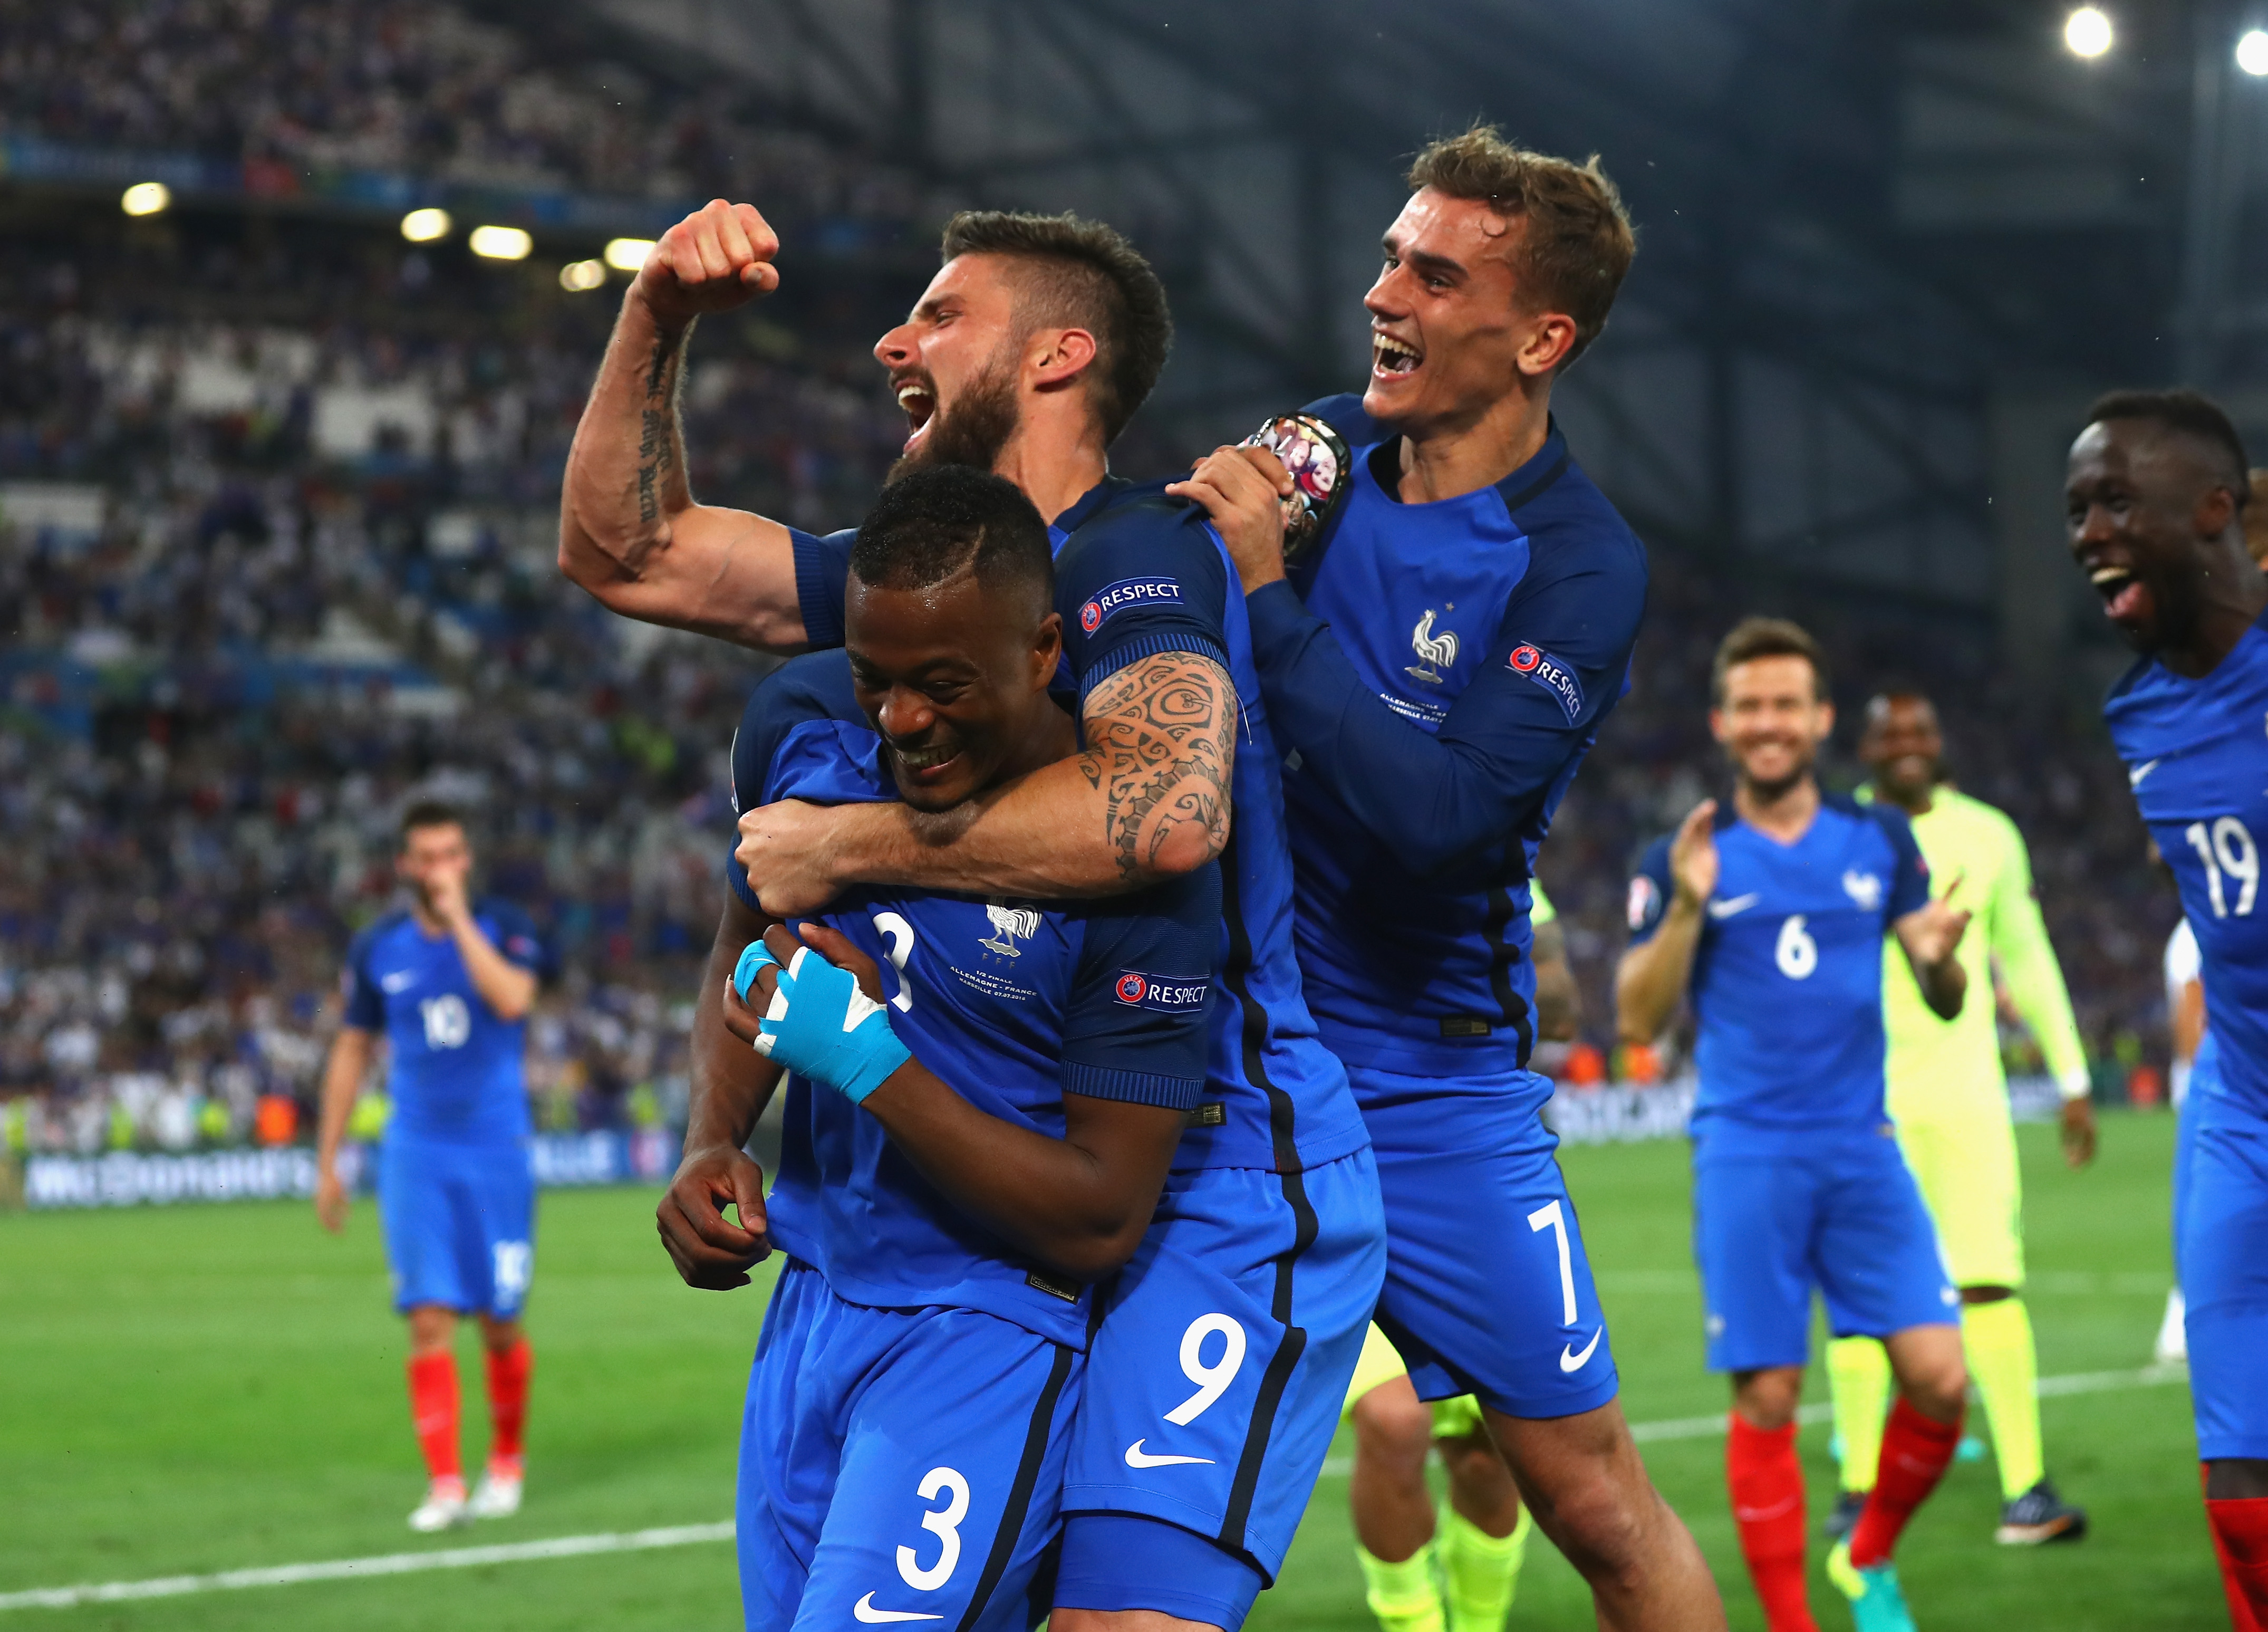 MARSEILLE, FRANCE - JULY 07:  (L to R) Patrice Evra, Olivier Giroud and Antoine Griezmannof France celebrate their team's 2-0 win in the UEFA EURO semi final match between Germany and France at Stade Velodrome on July 7, 2016 in Marseille, France.  (Photo by Lars Baron/Getty Images)